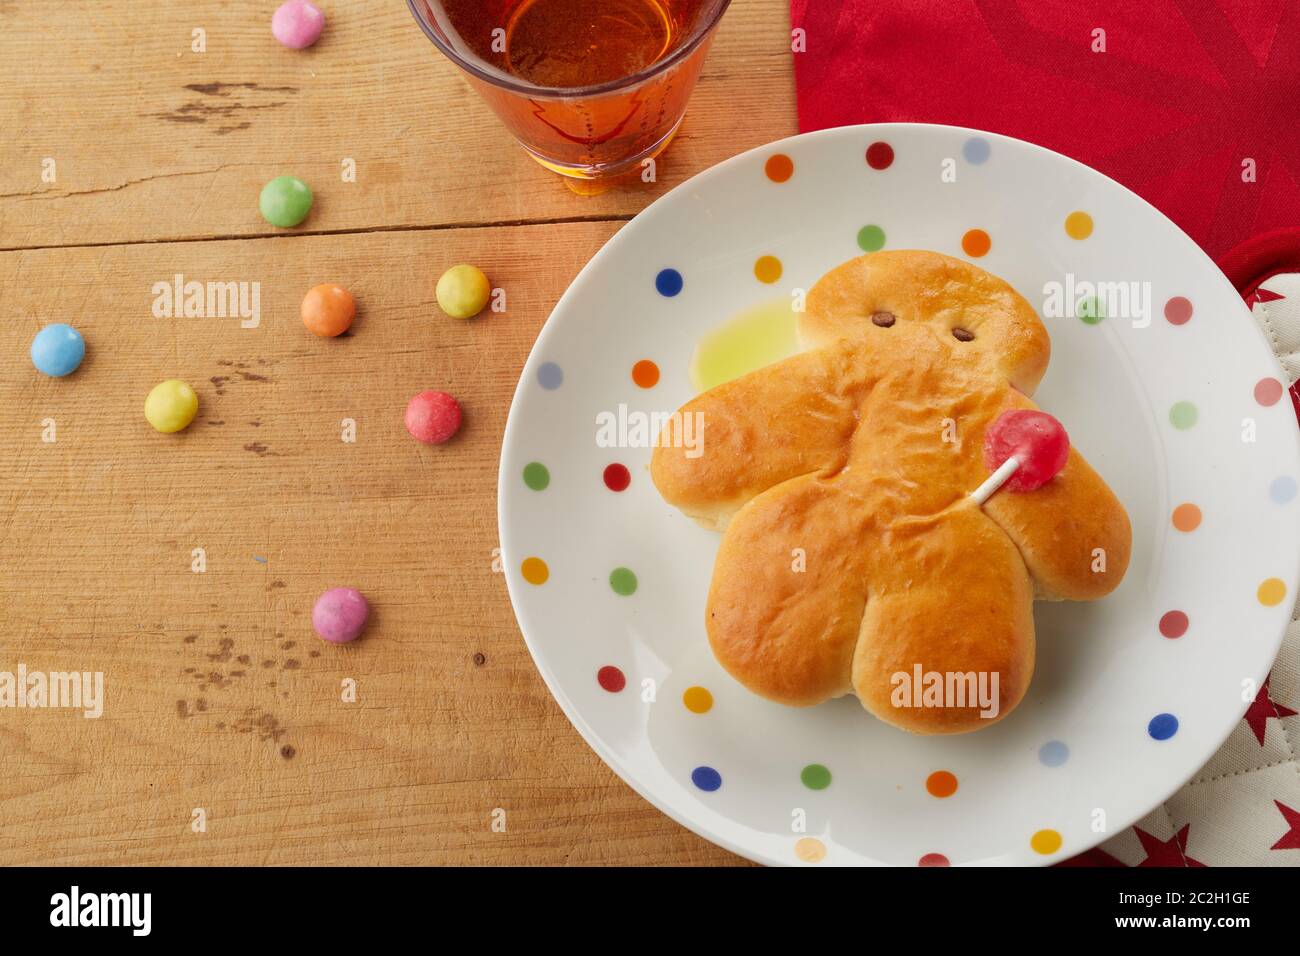 Mini Stuten bread man on a polka dot plate with colorful candy and glass of beverage viewed from above on a festive table for St Nicholas celebrations Stock Photo